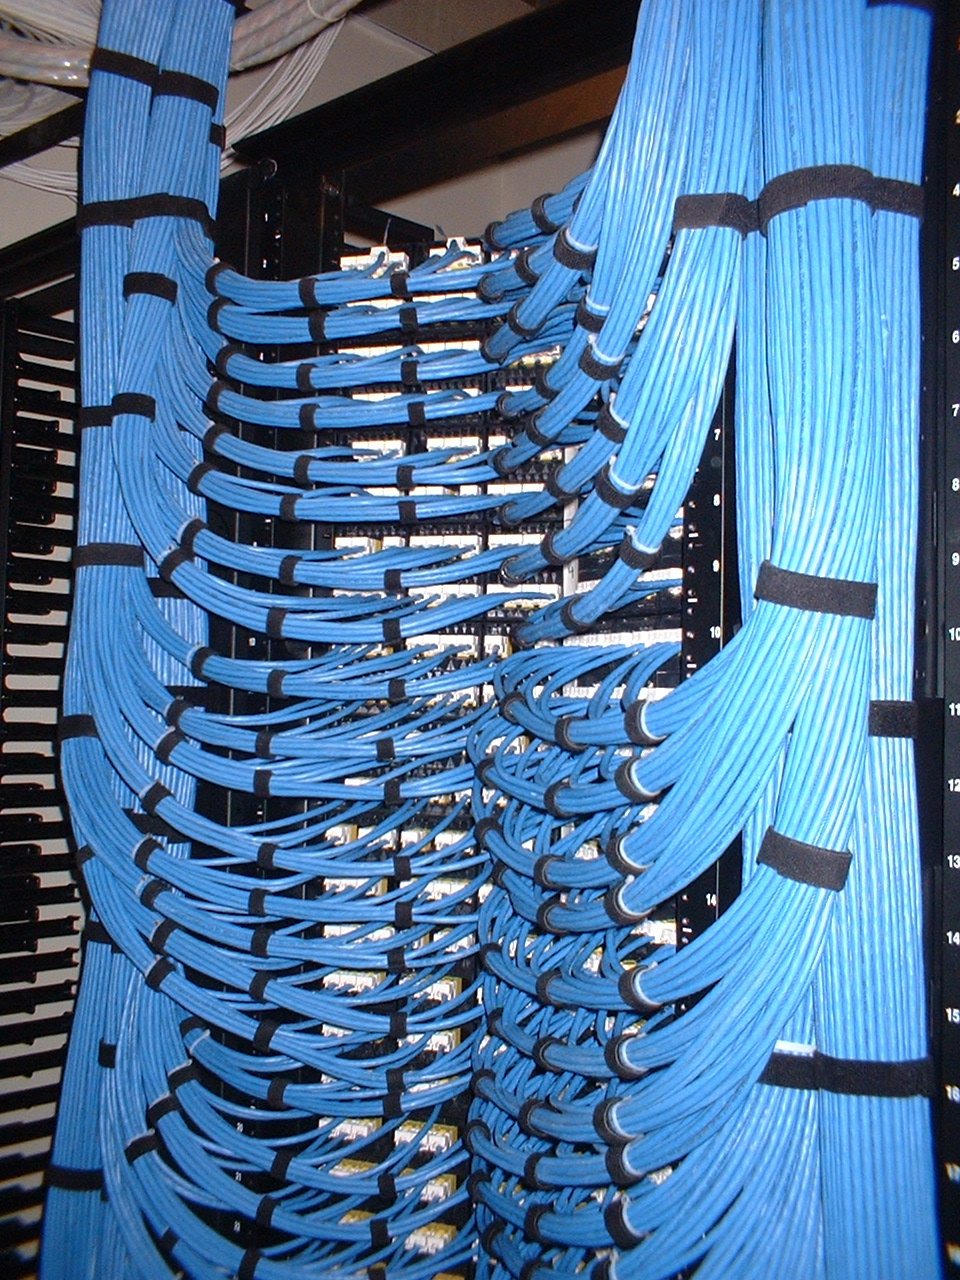 Patch Cables In Rack Shelf